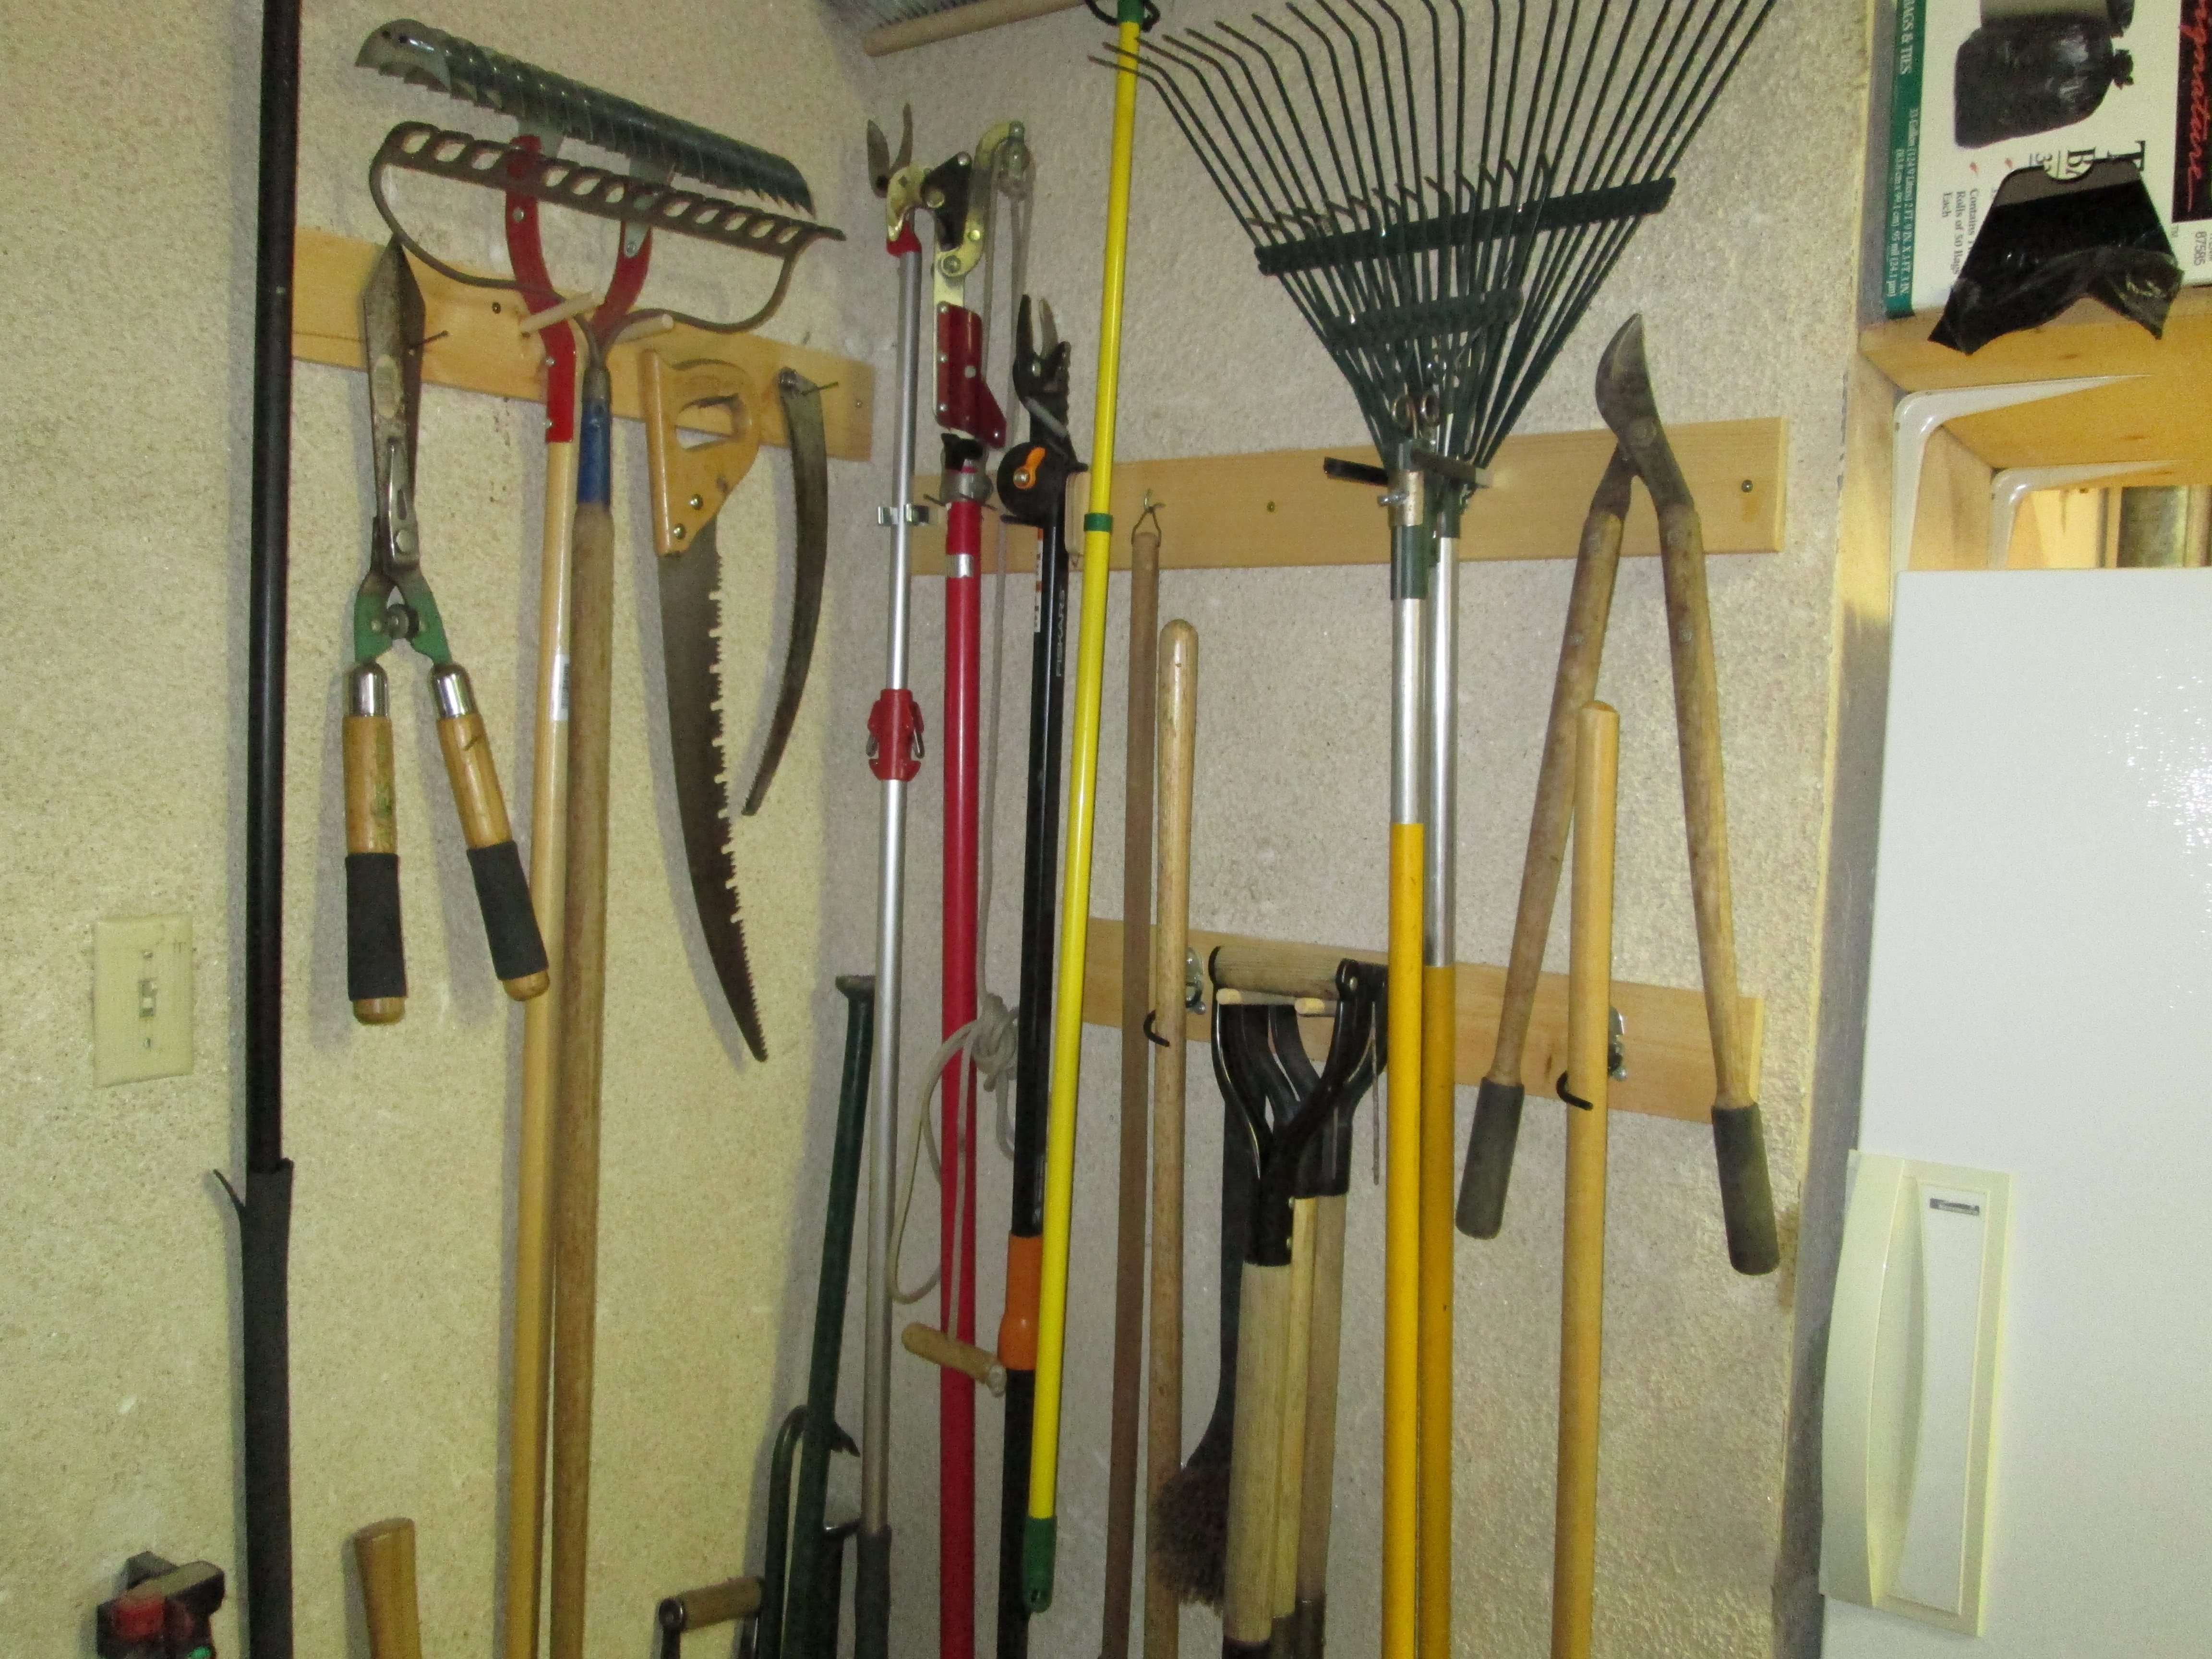 tools to hang pictures on wall